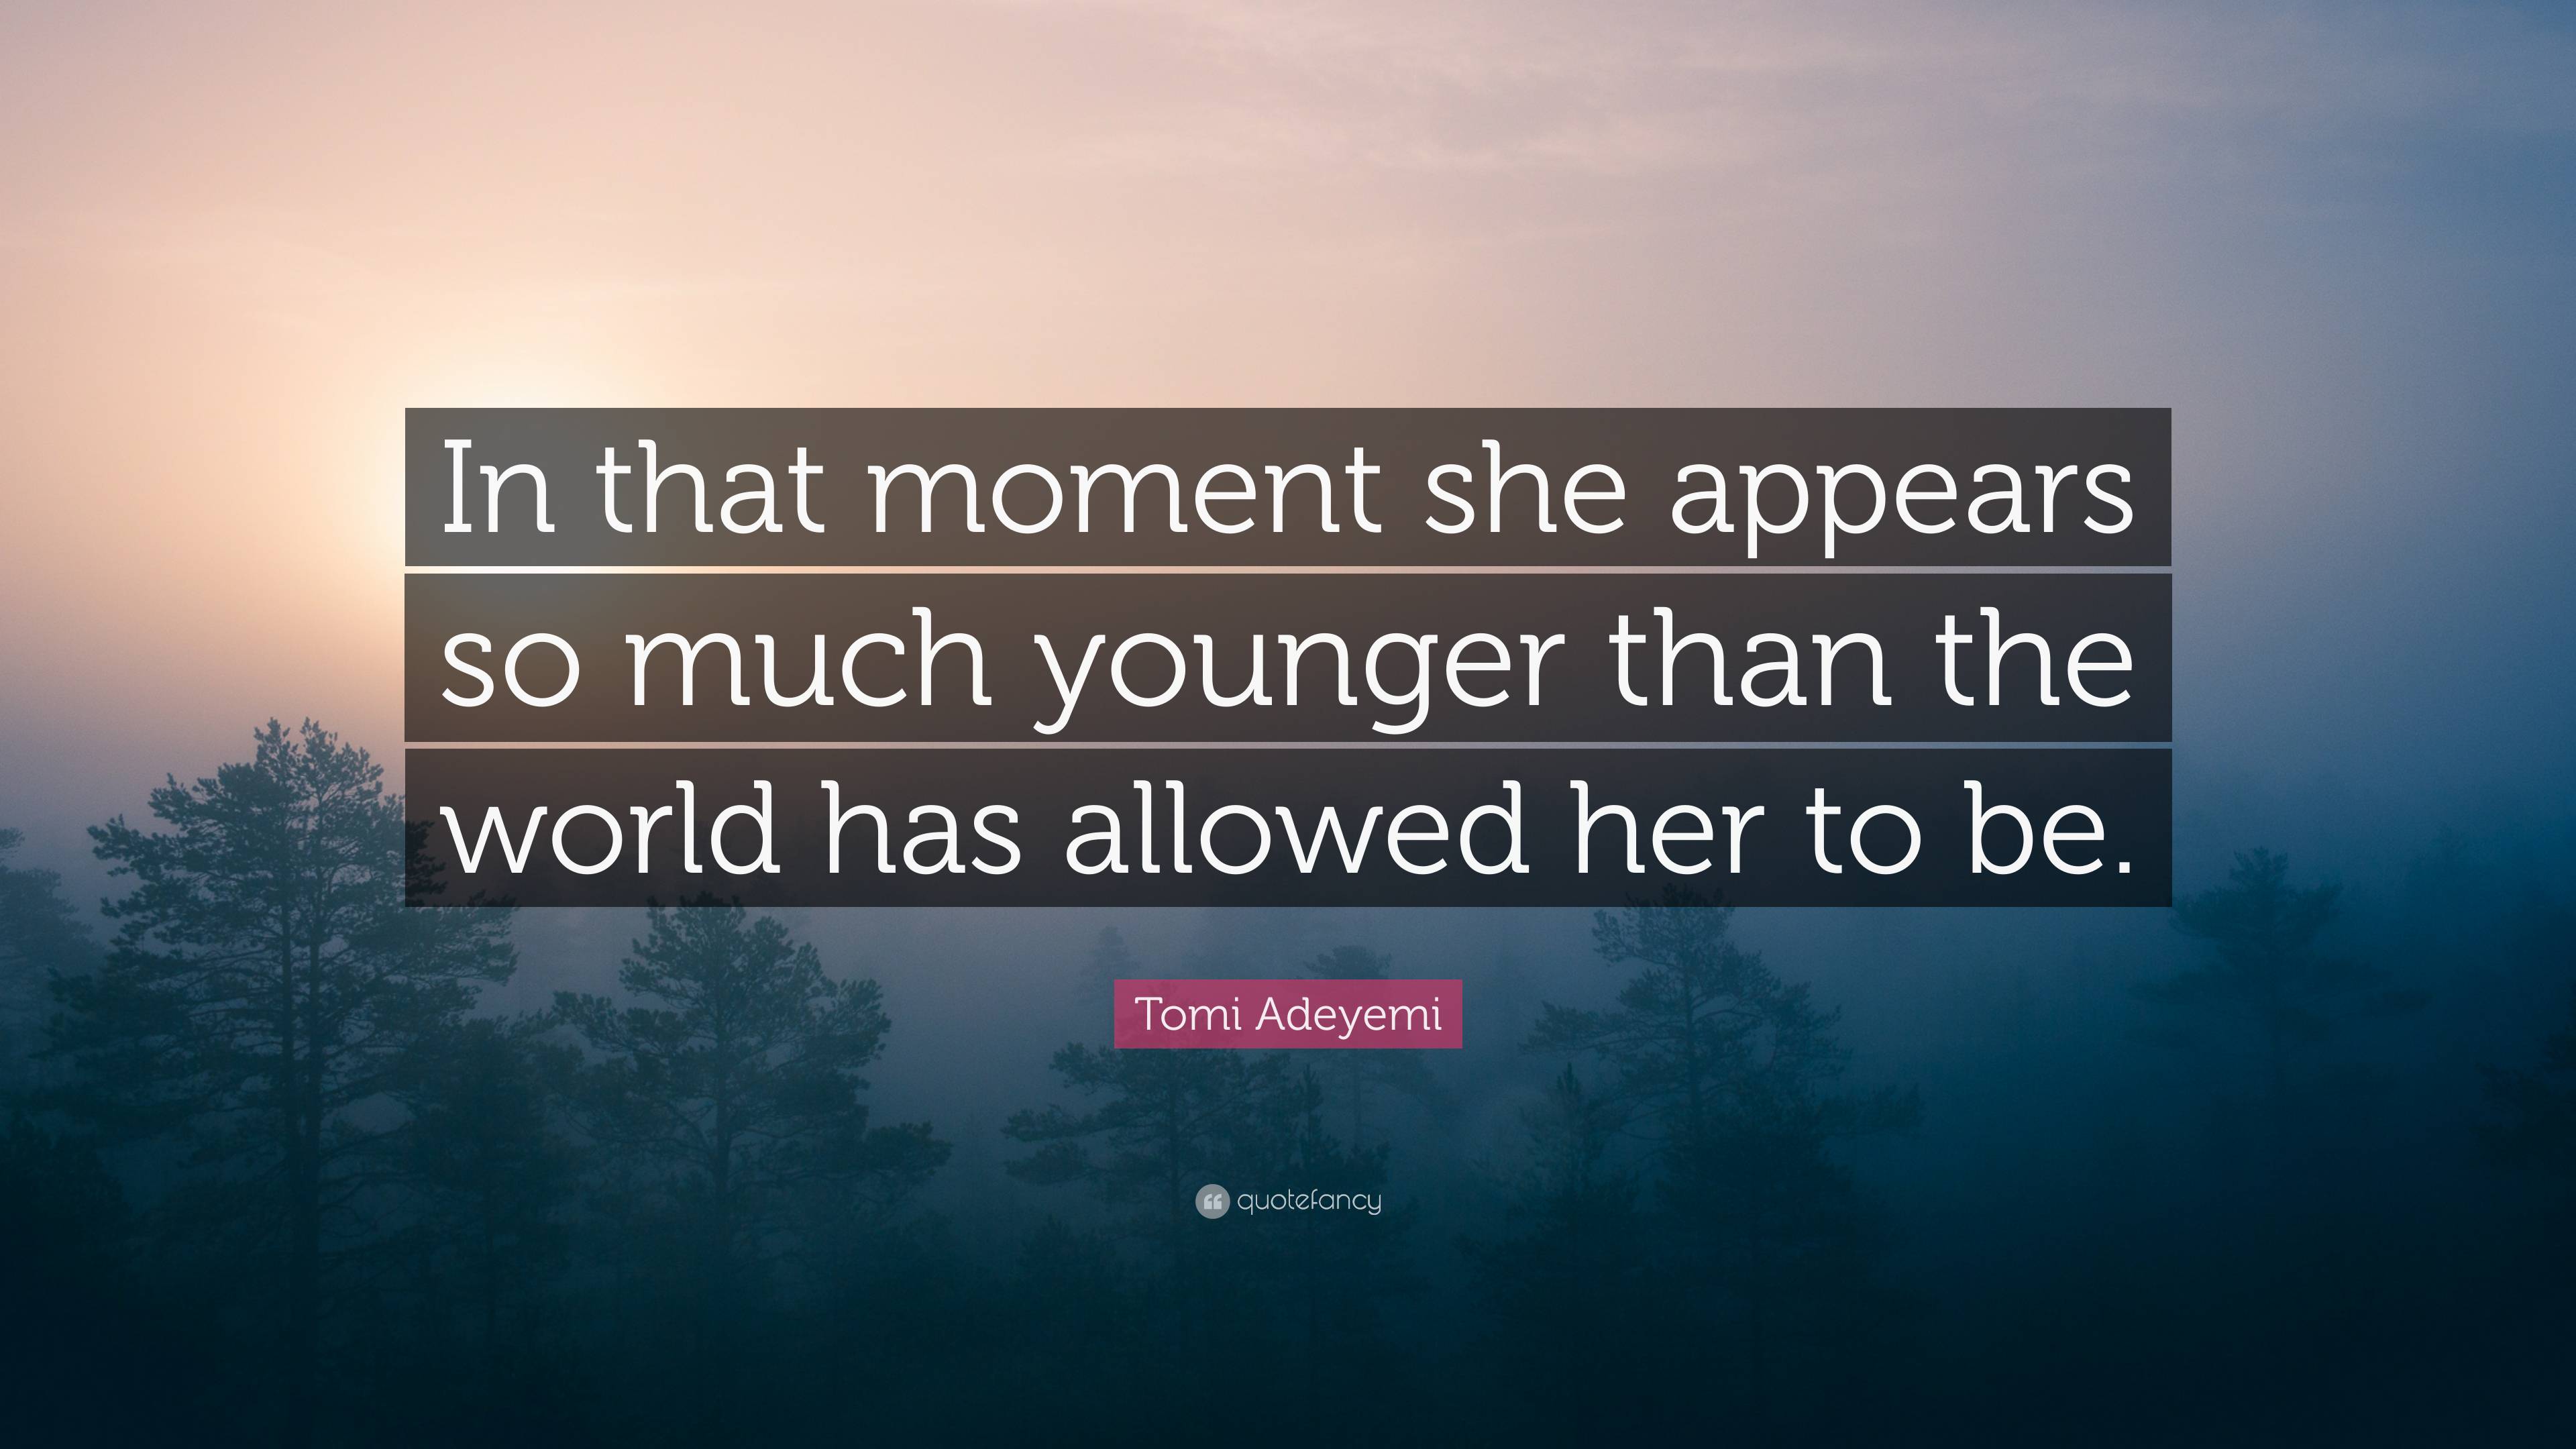 Tomi Adeyemi Quote: “In that moment she appears so much younger than ...